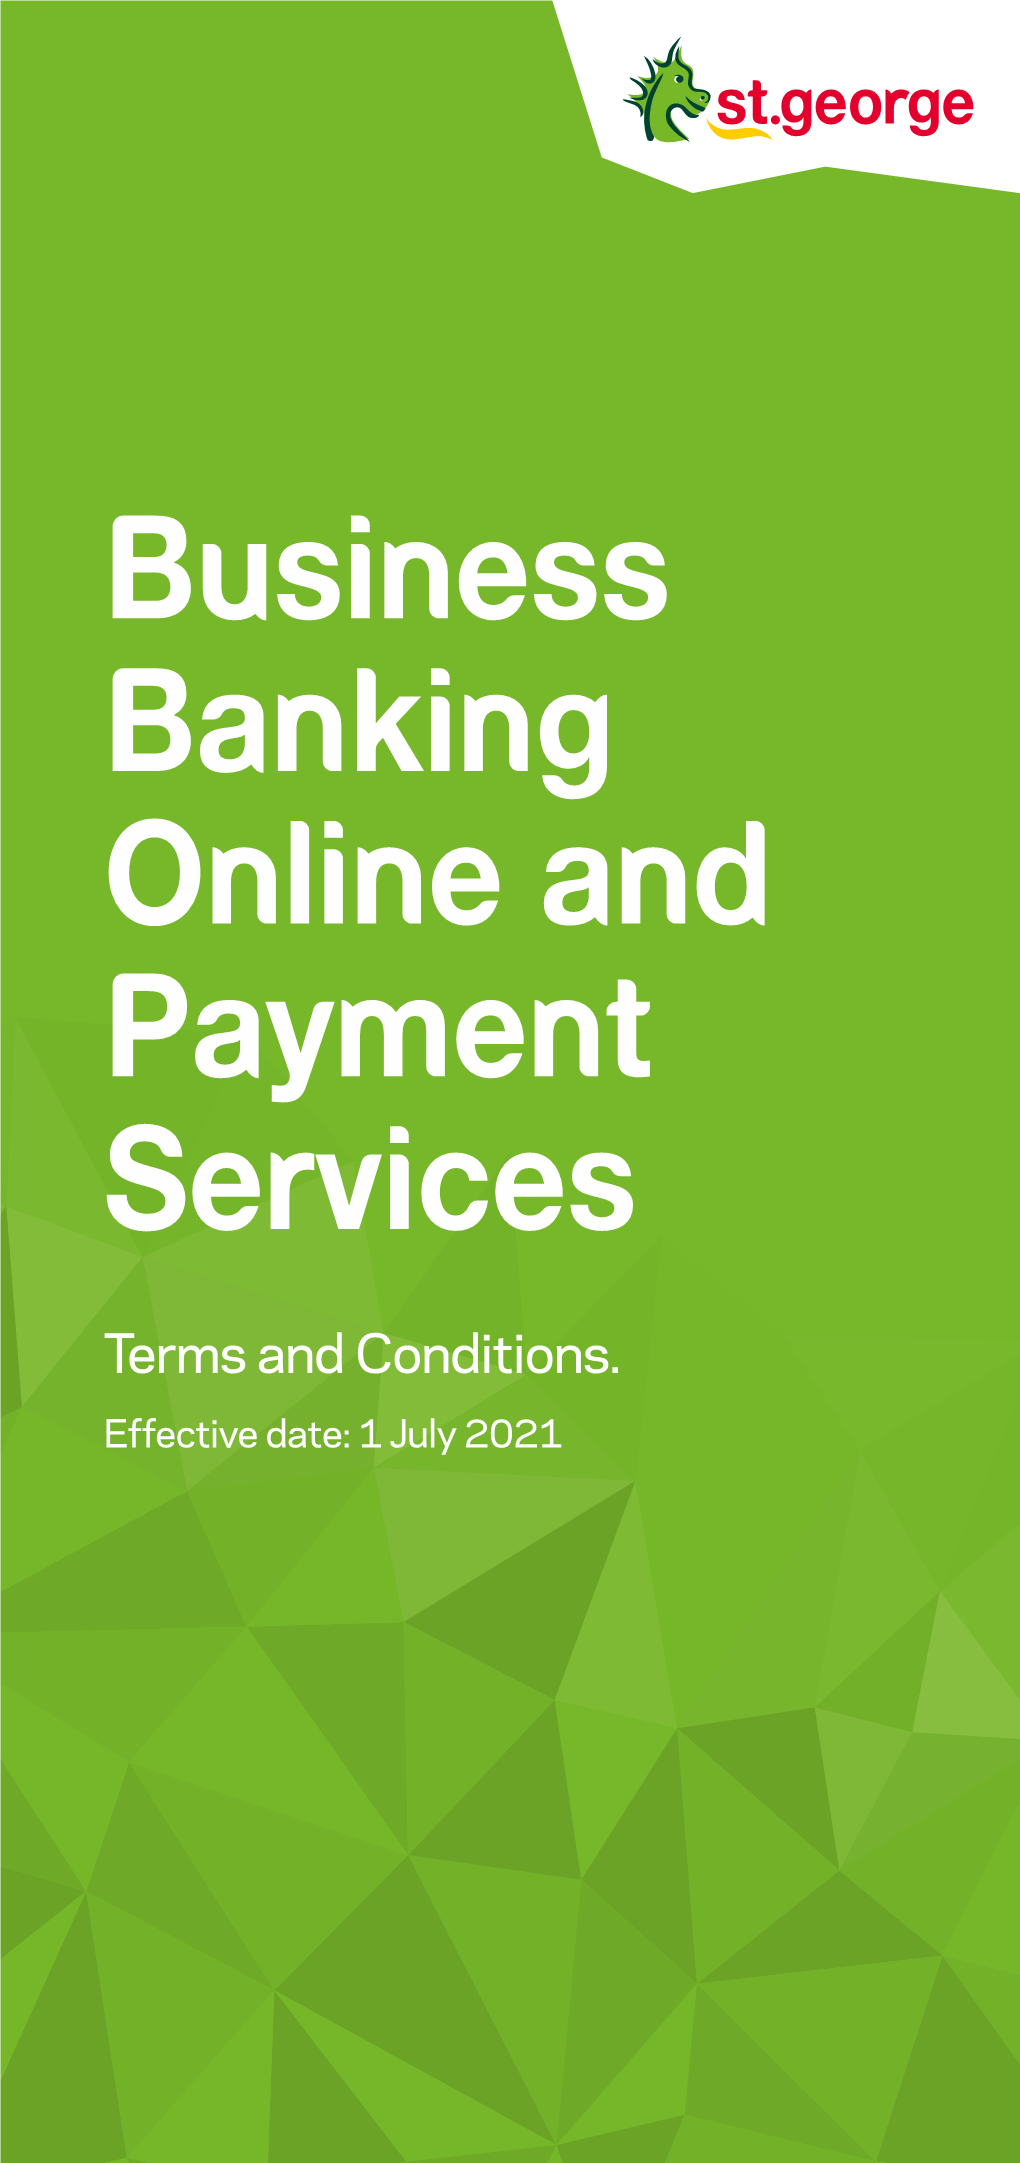 Business Banking Online and Payment Services